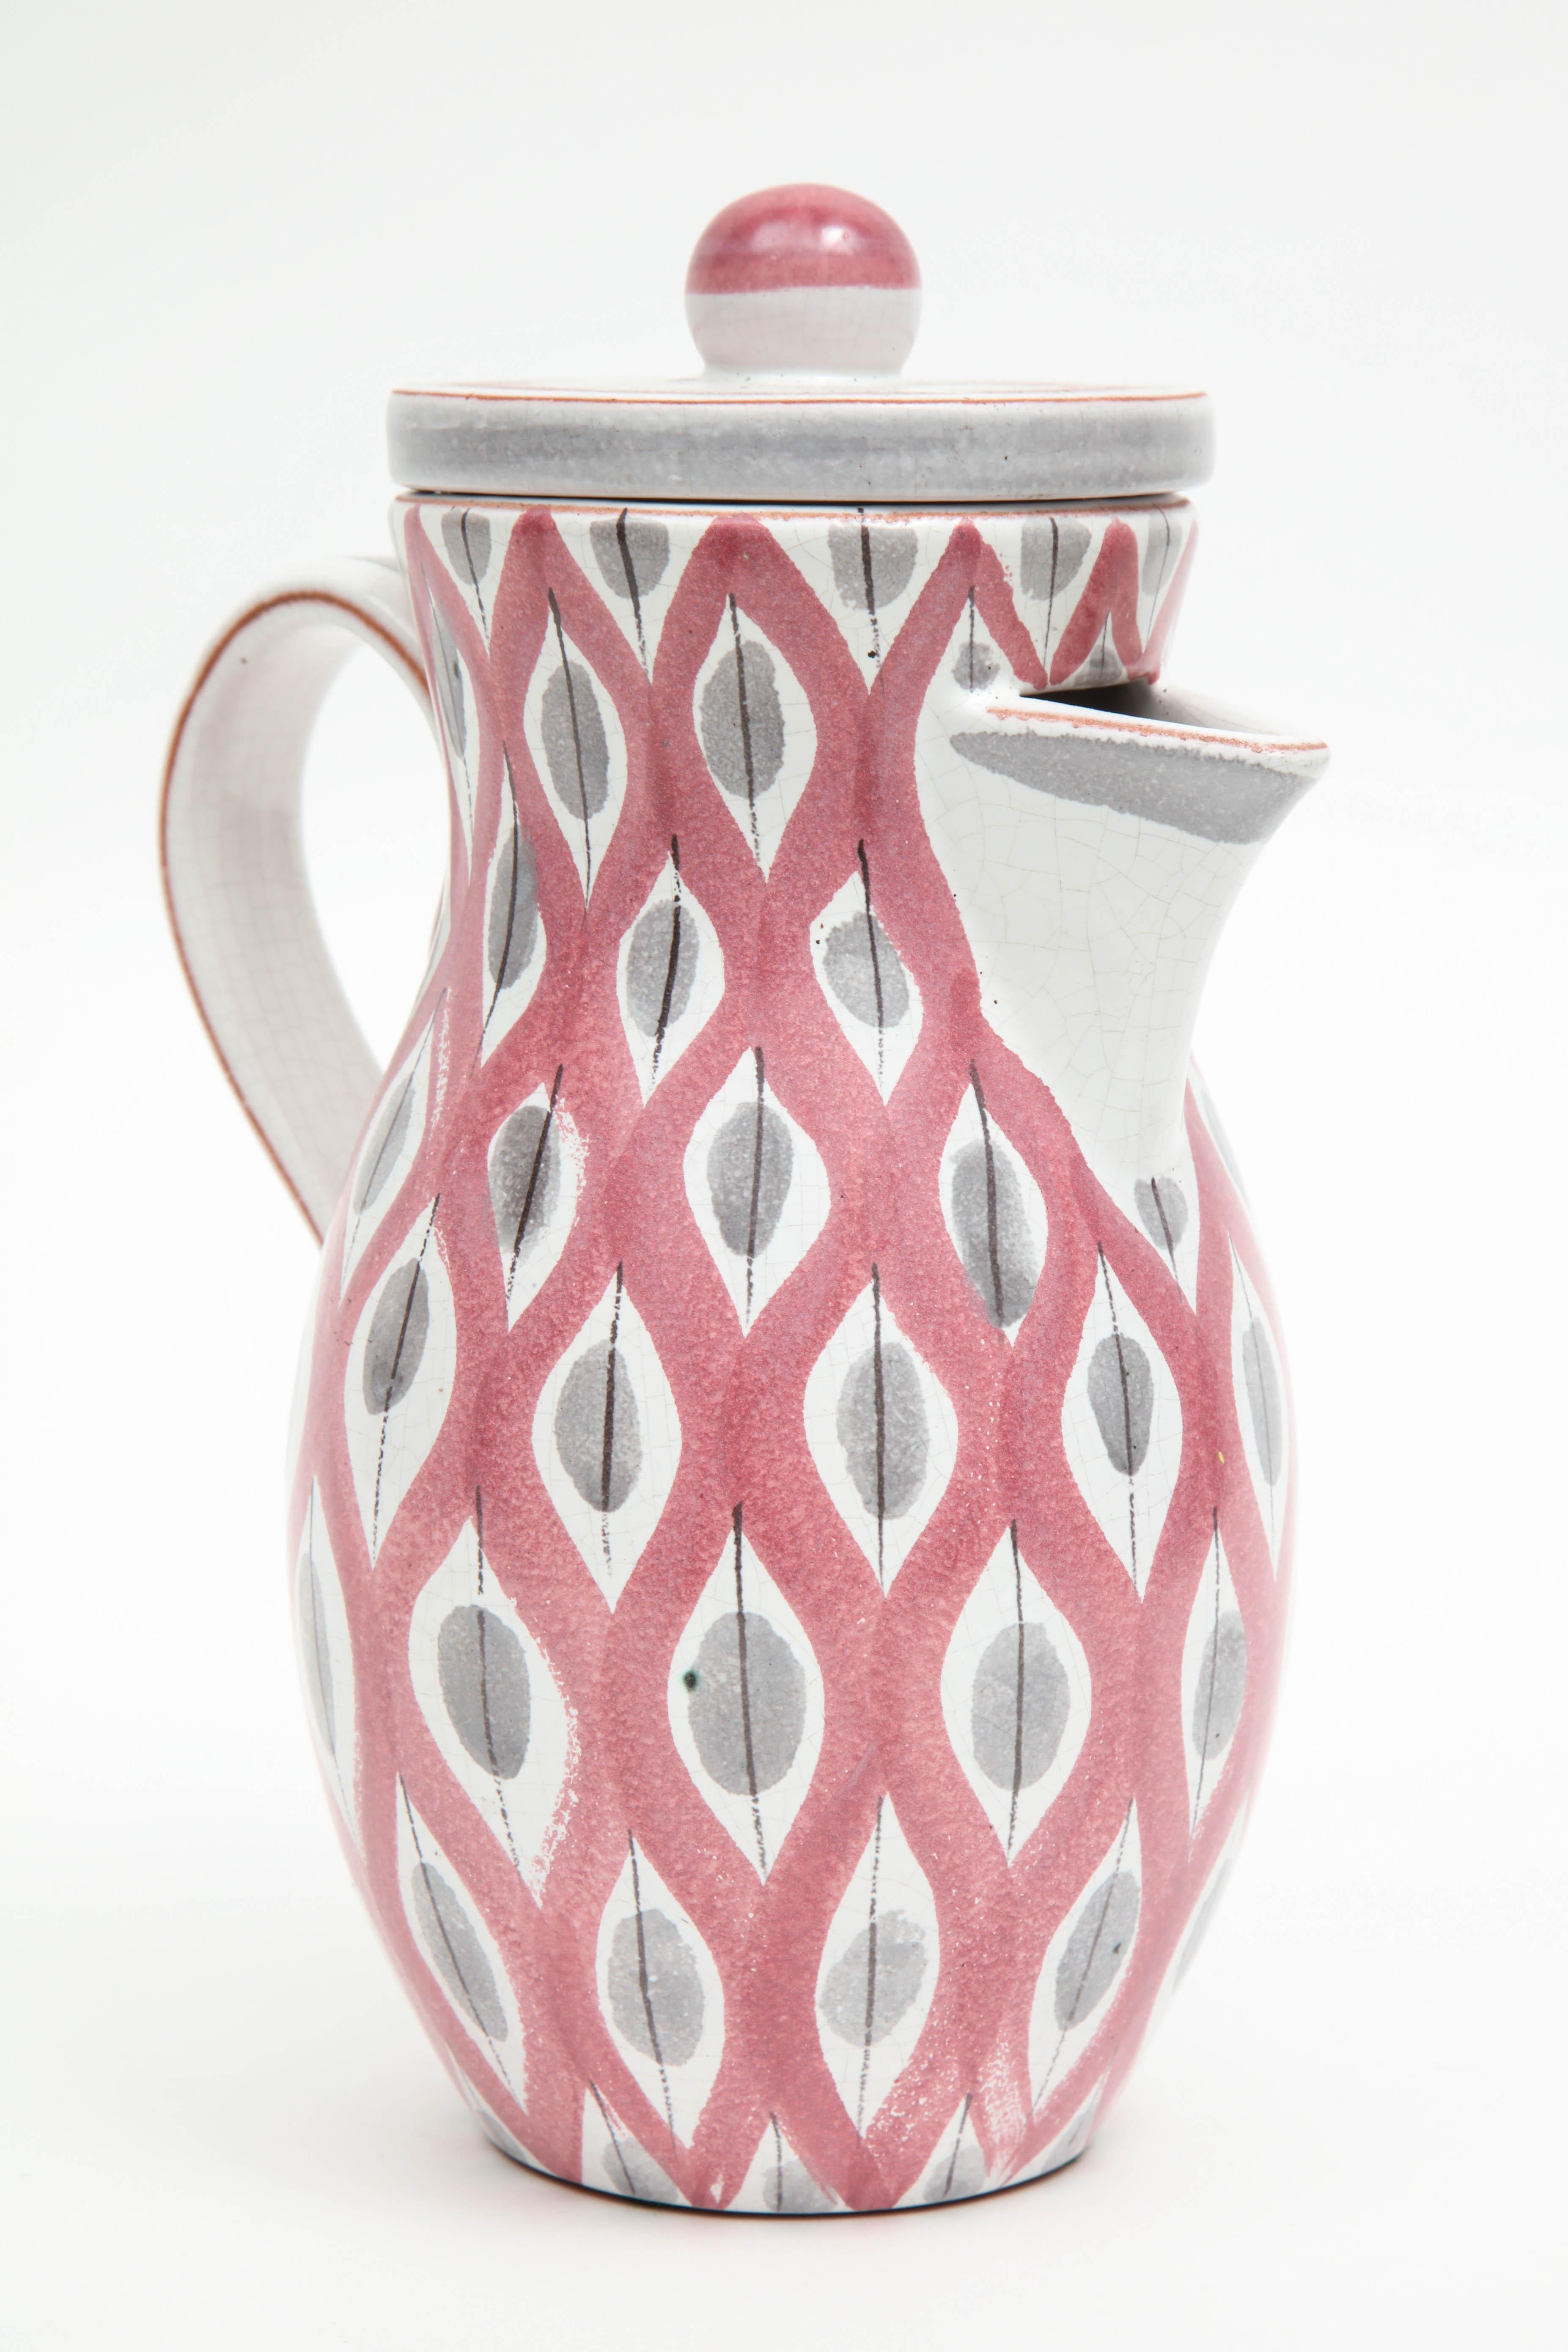 Pitcher by Stig Lindberg, Scandinavian, Midcentury, Red, Gray and White, C 1950 In Good Condition For Sale In New York, NY